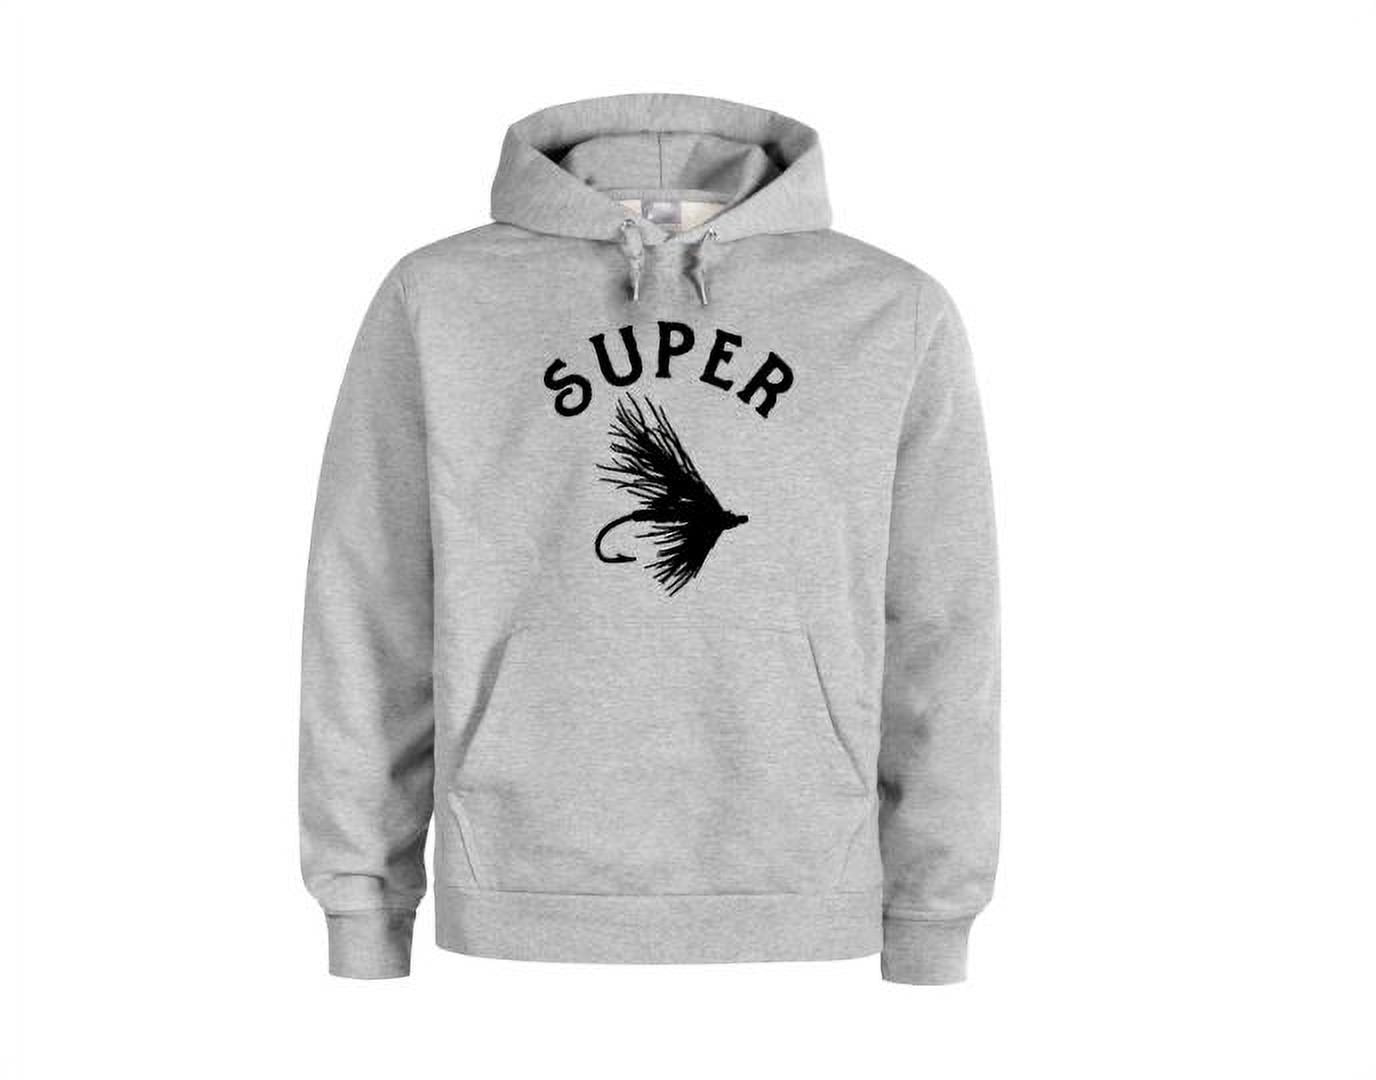 Fly Fishing Hoodie, Super Fly, Outdoors Wear, Fishing Apparel, Unisex  Hoodies, Fly Fishing Apparel, Fishing Gear, Graphic Hoodie, Fishing, Grey  (Black Text), 2XL 